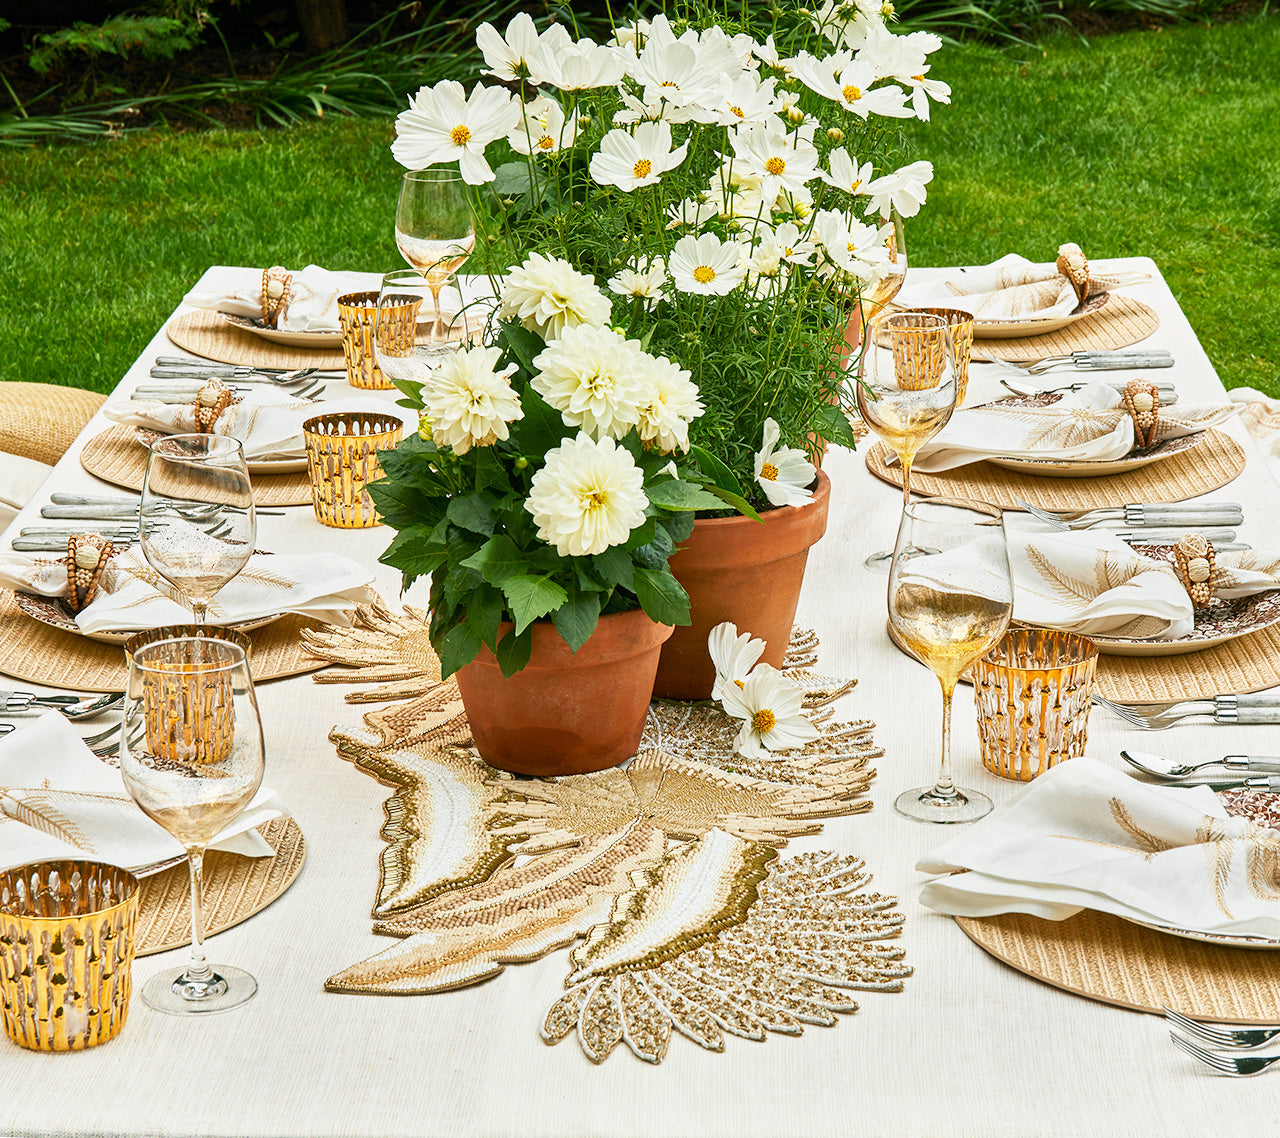 Glam Grass Placemat in Natural & Gold, Set of 4